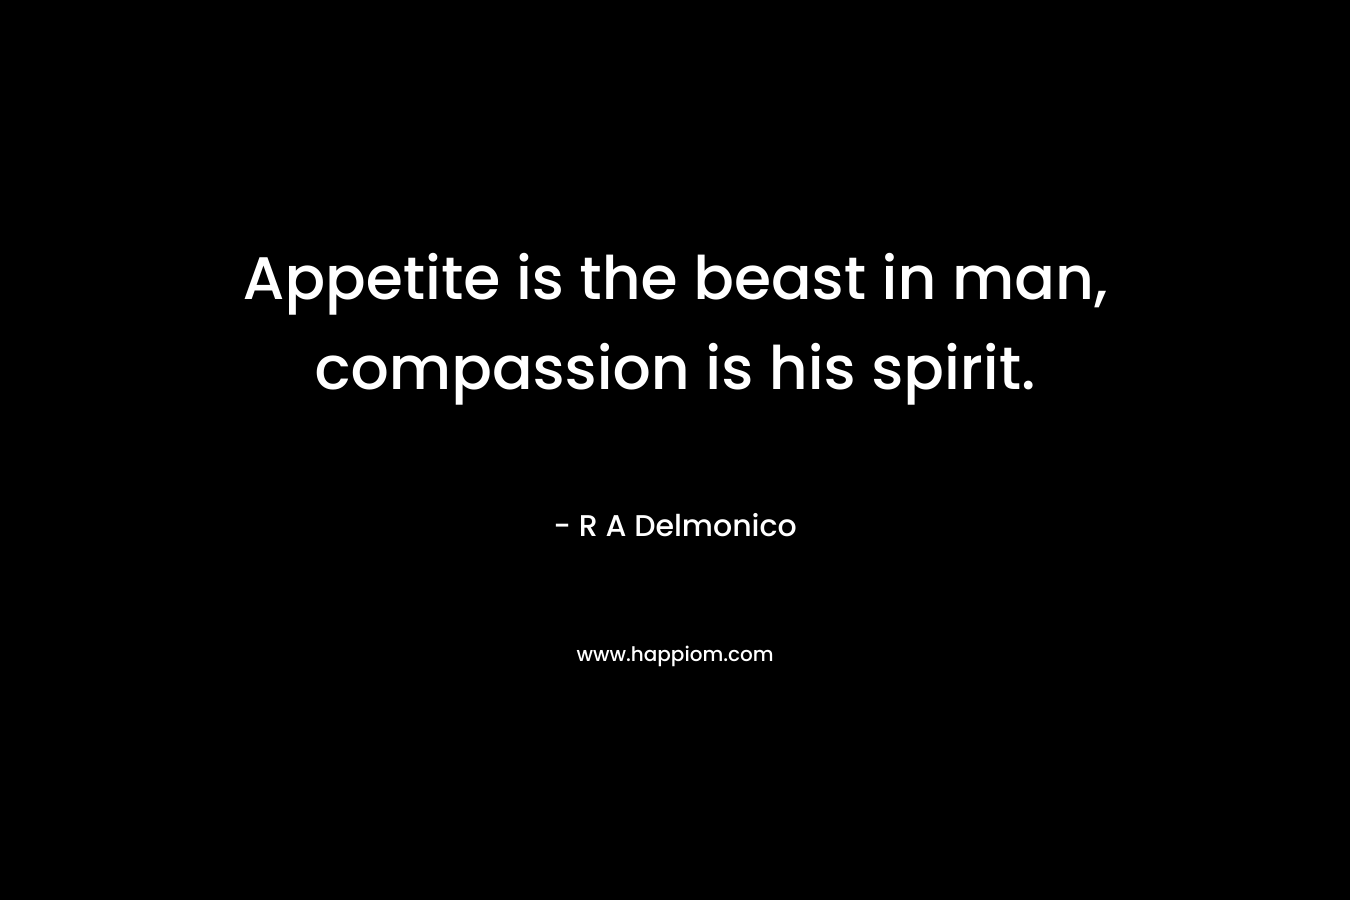 Appetite is the beast in man, compassion is his spirit. – R A Delmonico